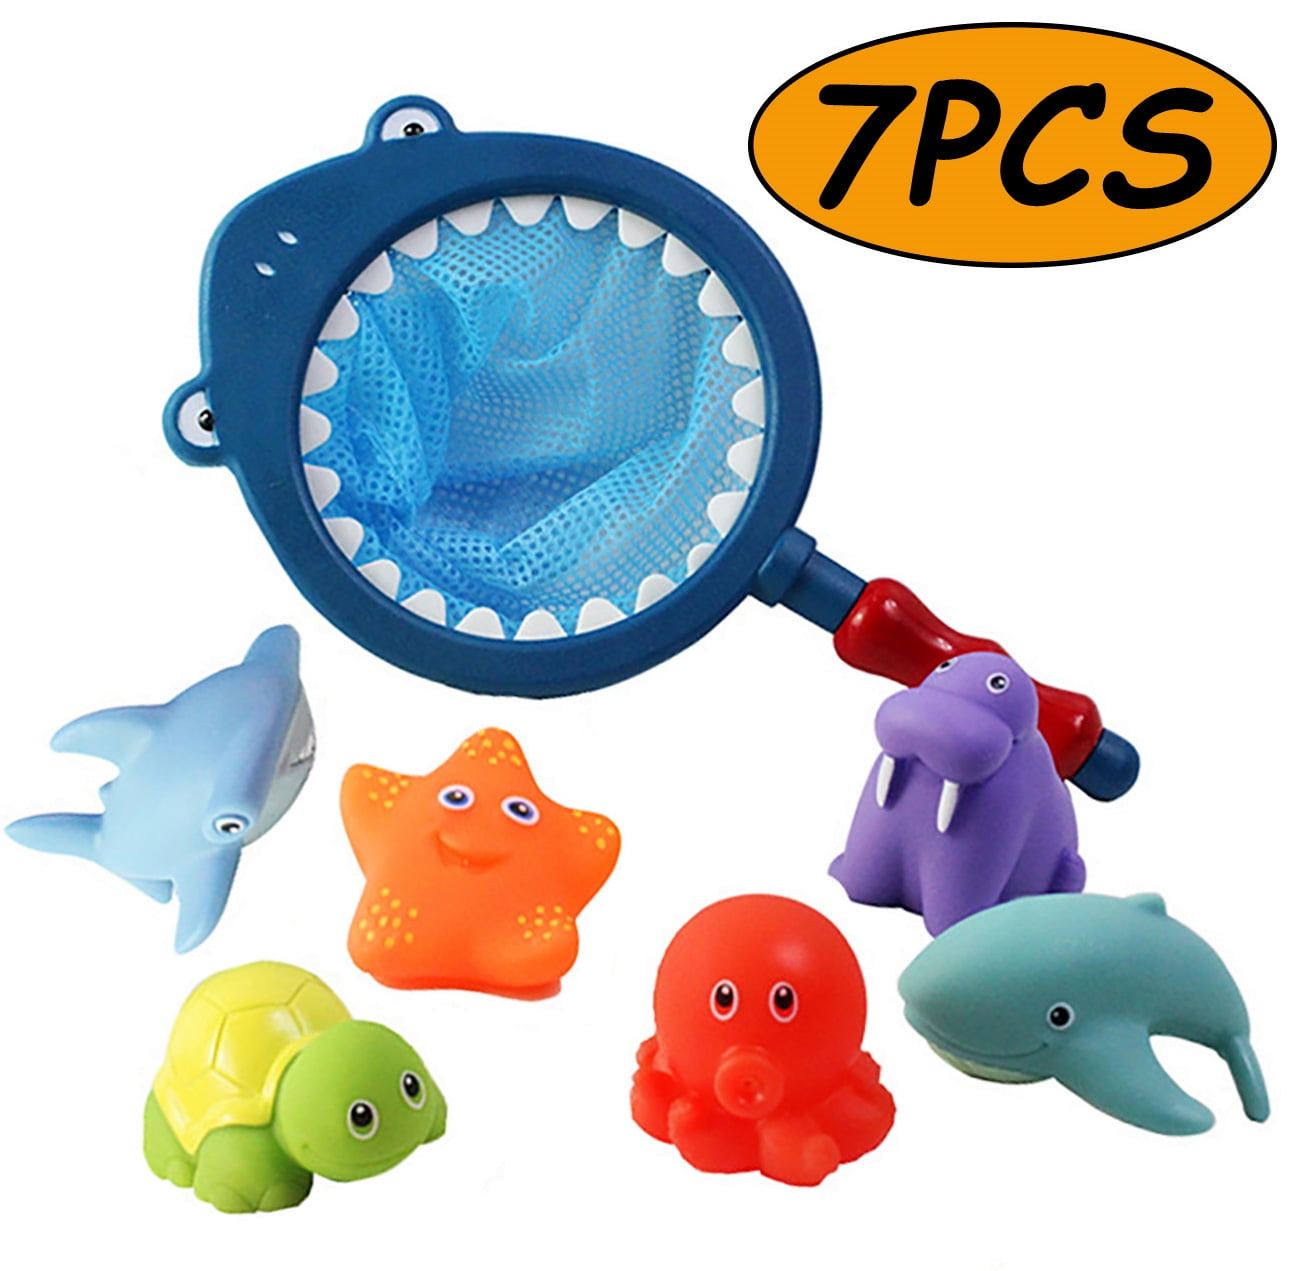 Bath Toy Pool Toys Toddlers Baby 12-24 Months Bath Tub Toy Floating Animals  Shark Fishing Play Set for Babies and Kids 7Pcs 